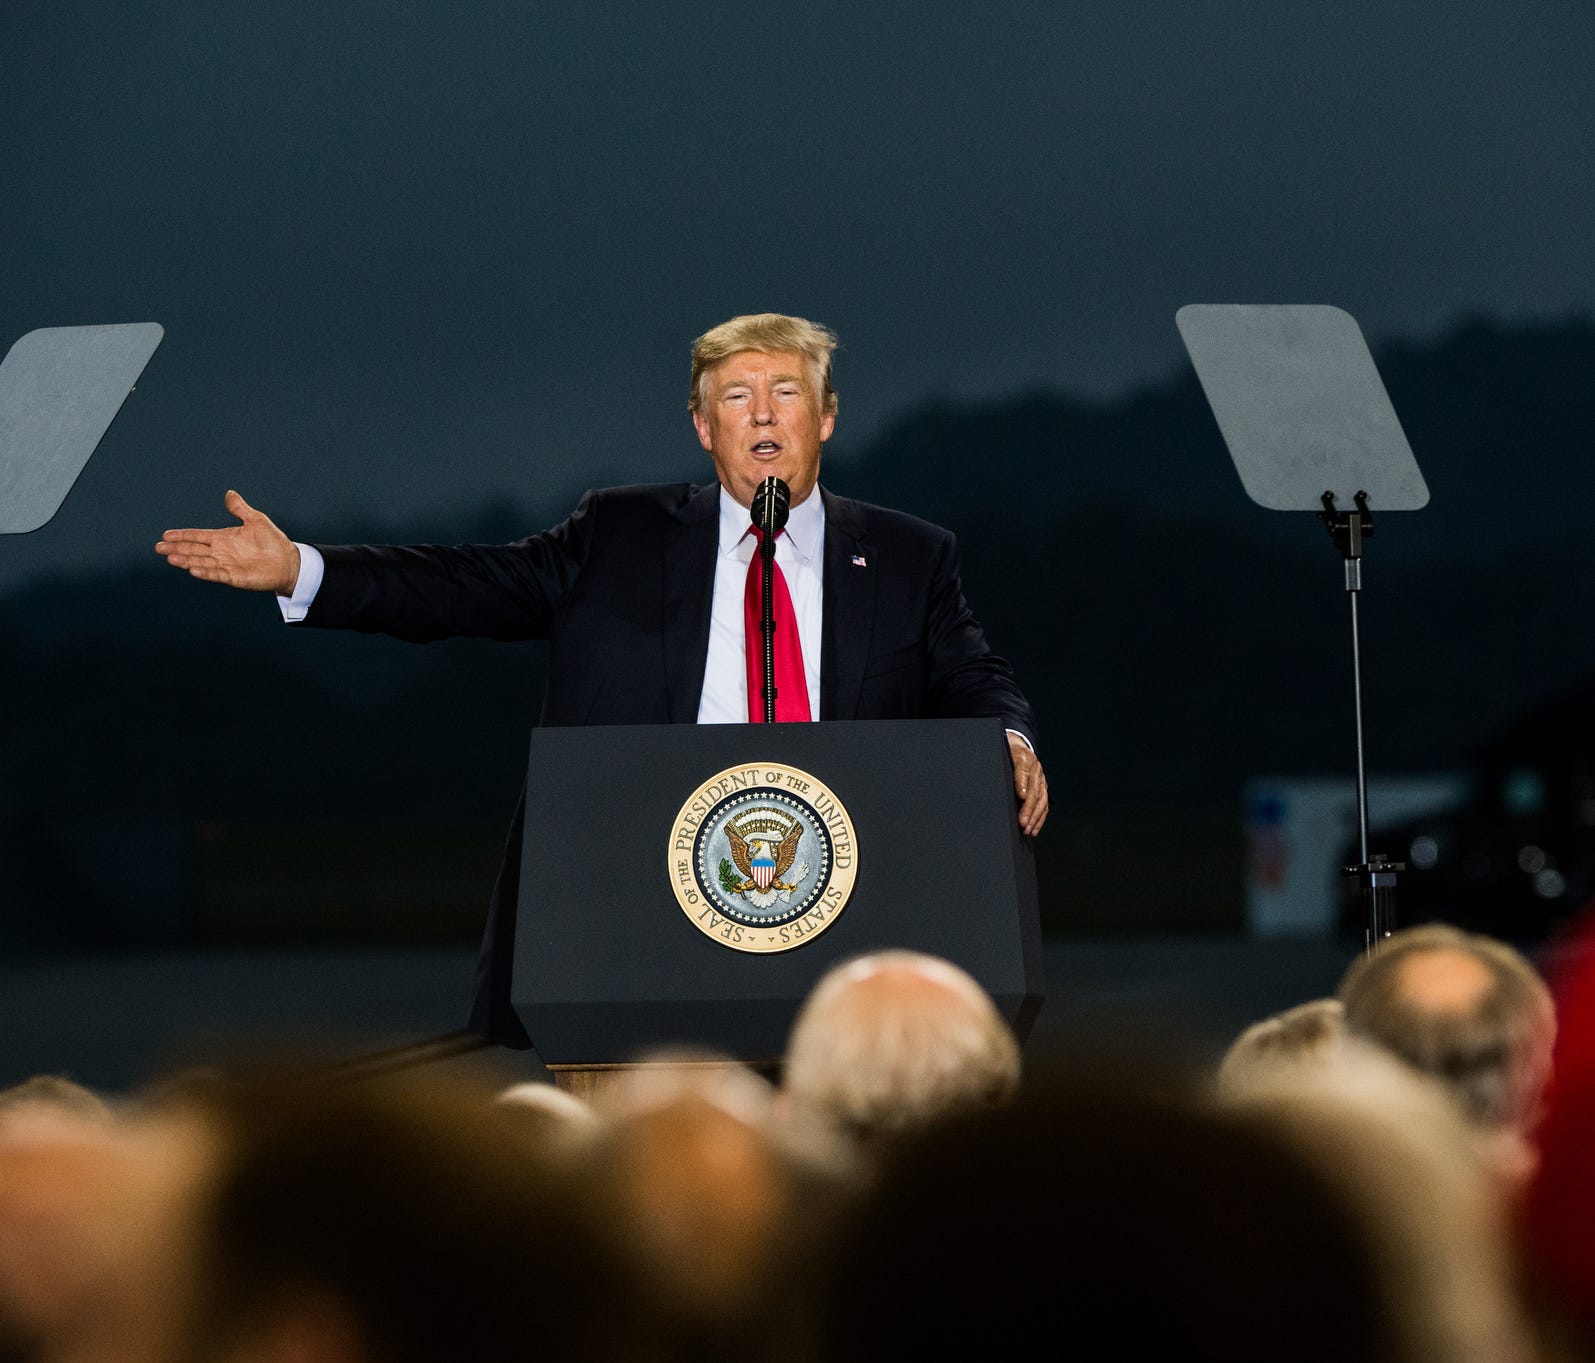 President Donald Trump addressed a crowd of about 1,000 on Wednesday evening in an Air National Guard hangar in Harrisburg. The private event began at 5:45 p.m. and focused on the President's tax reform proposal.